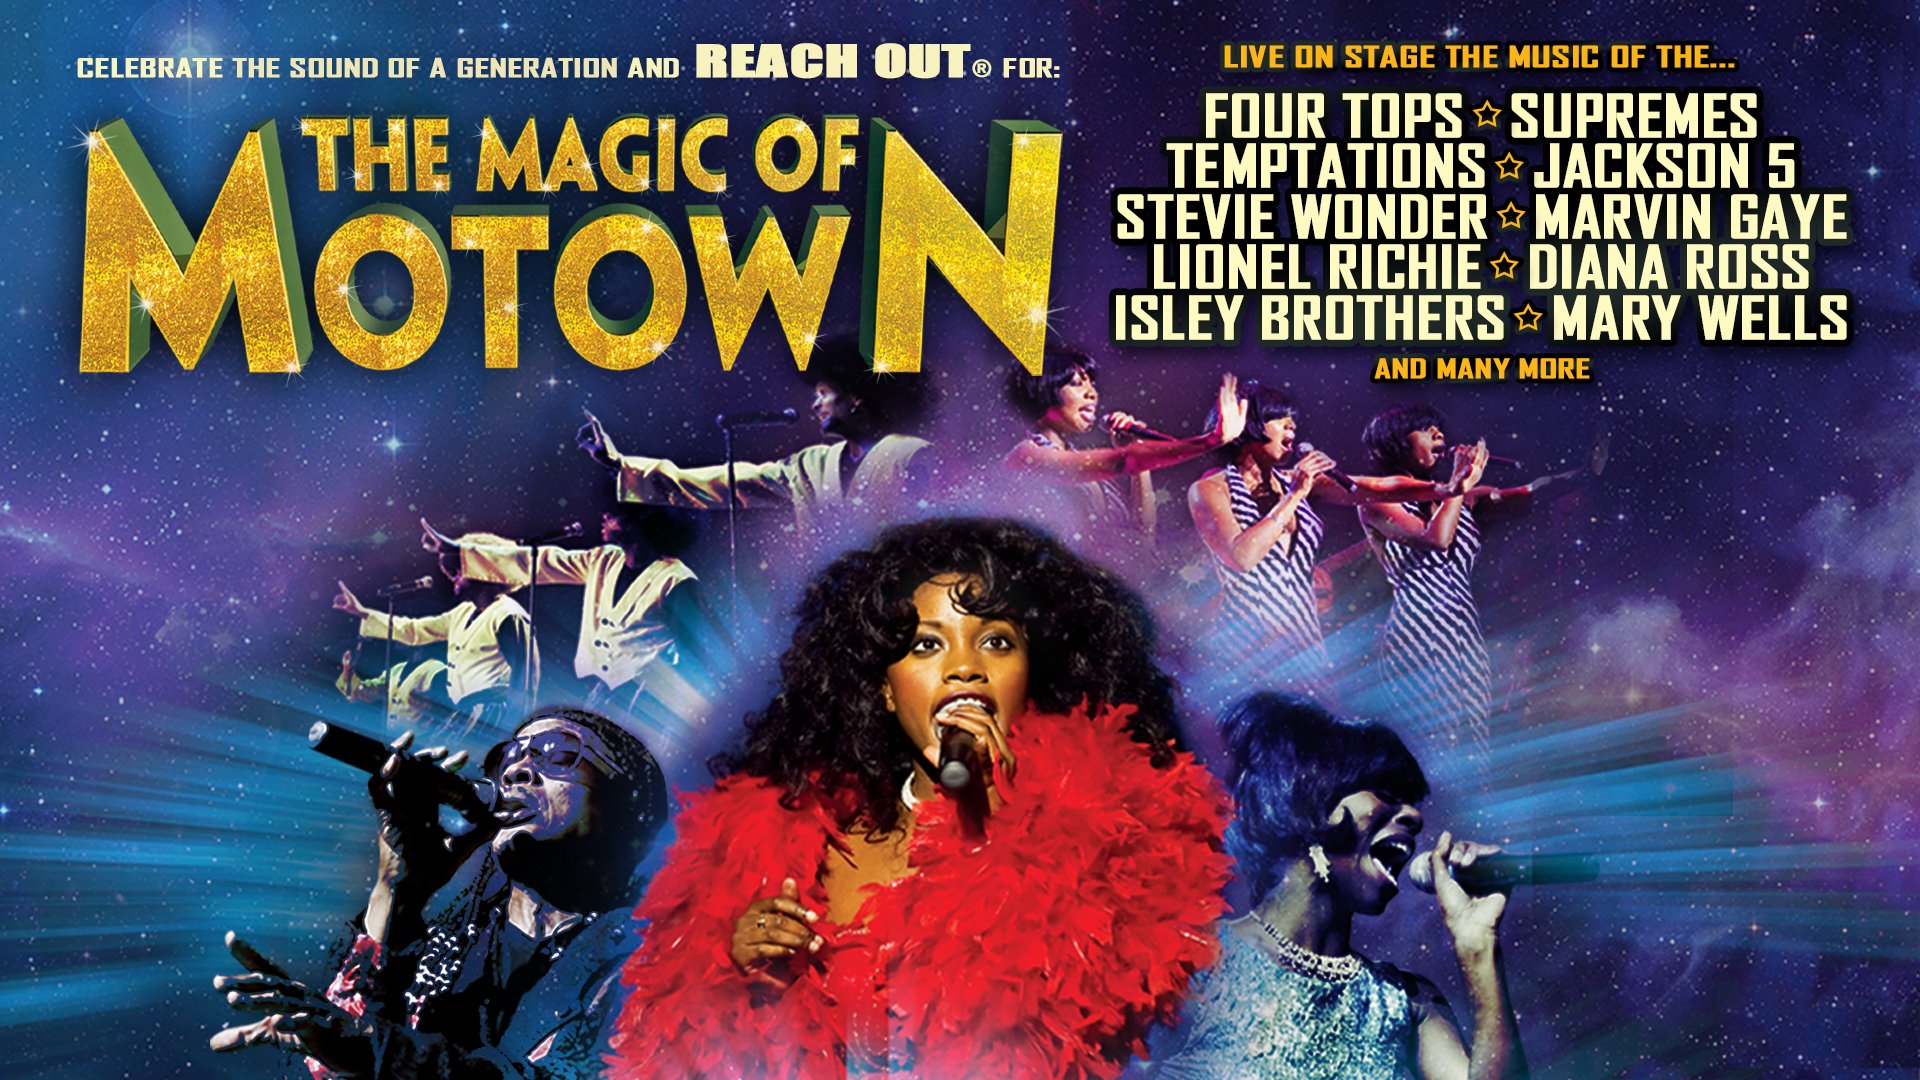 The Magic of Motown Top Image